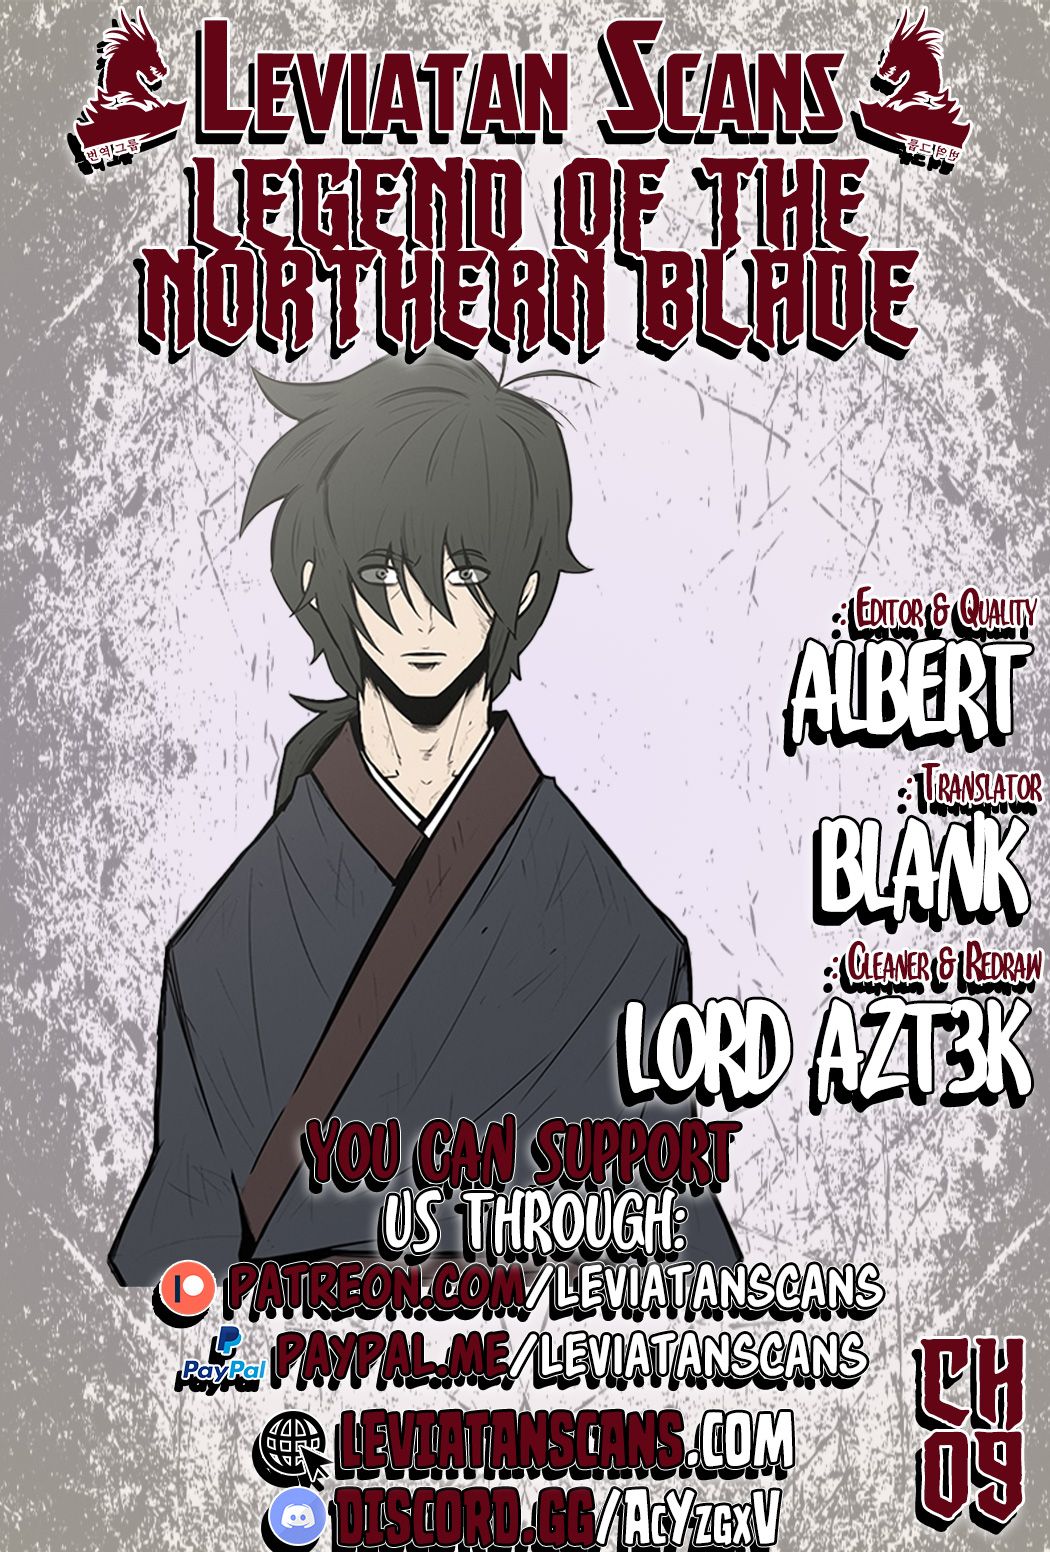 Legend of the Northern Blade chapter 9 page 1